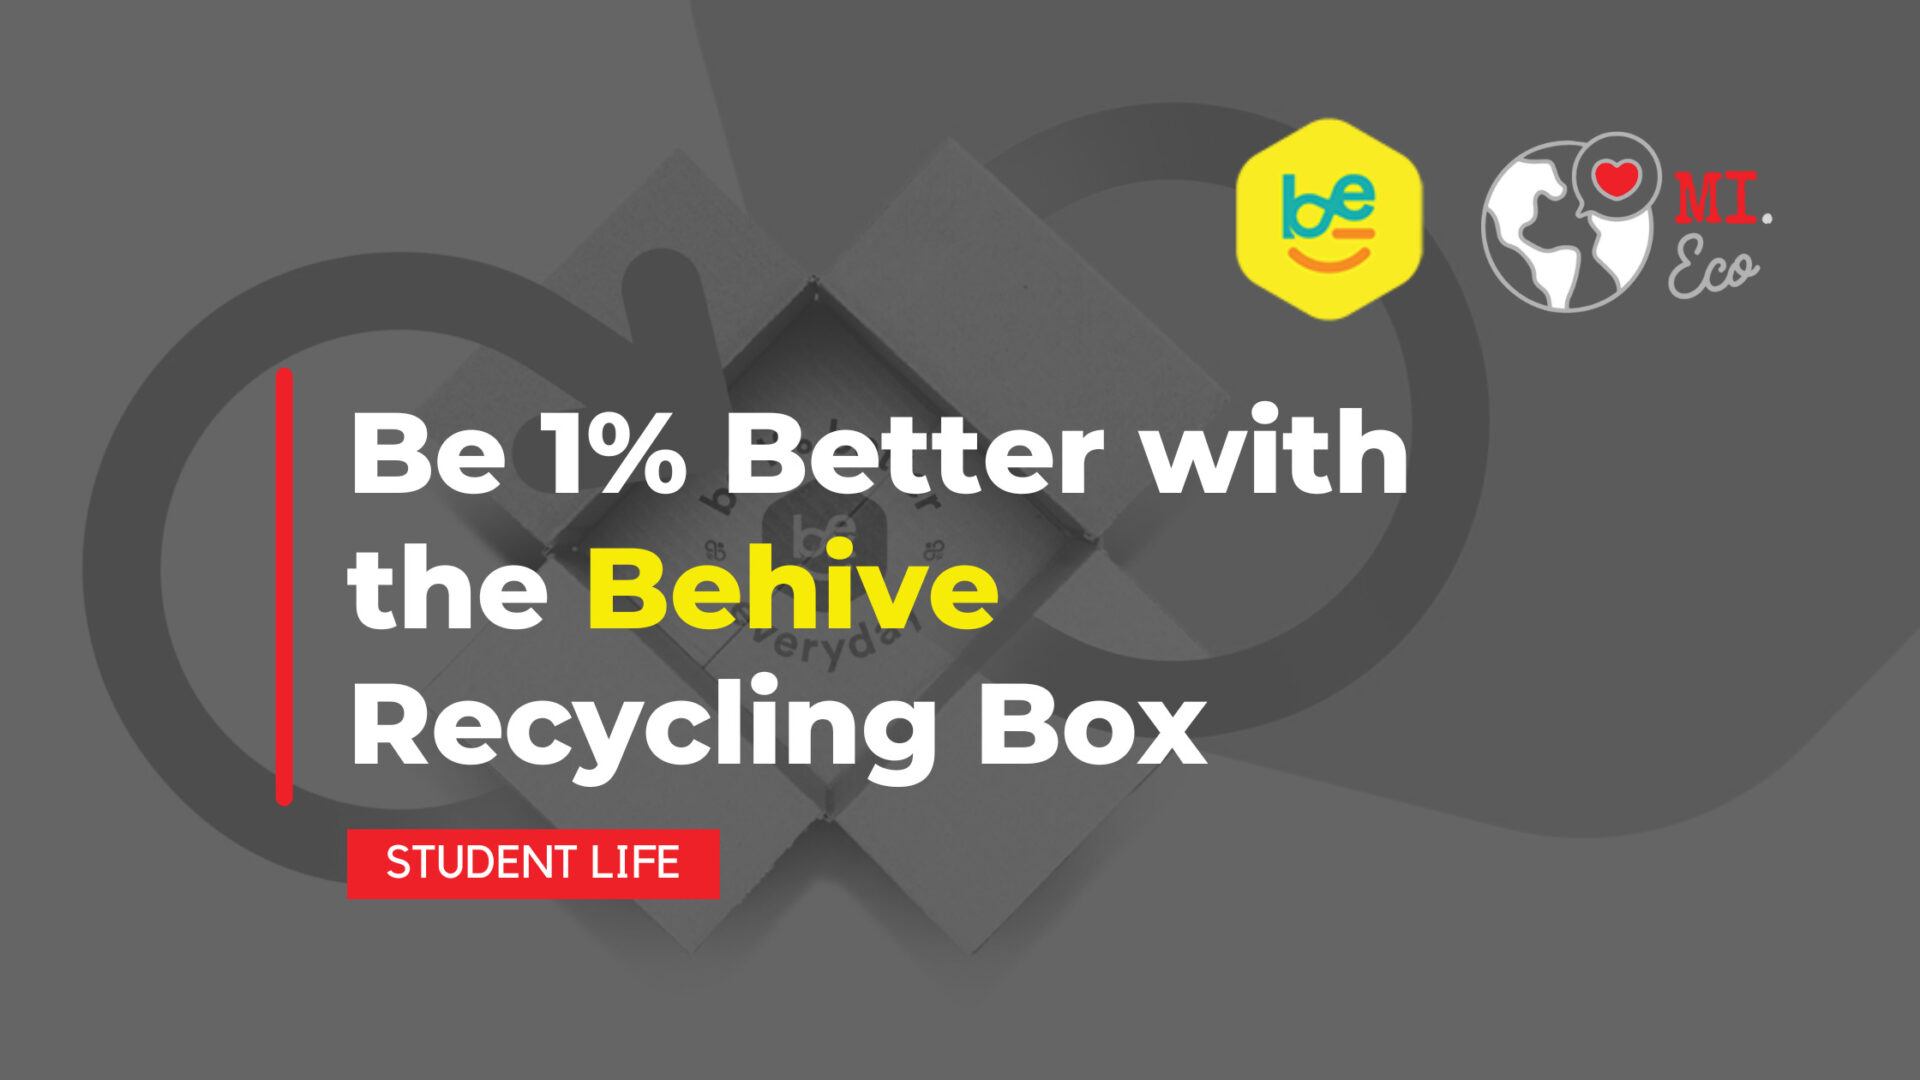 Be 1% Better with the Behive Recycling Box